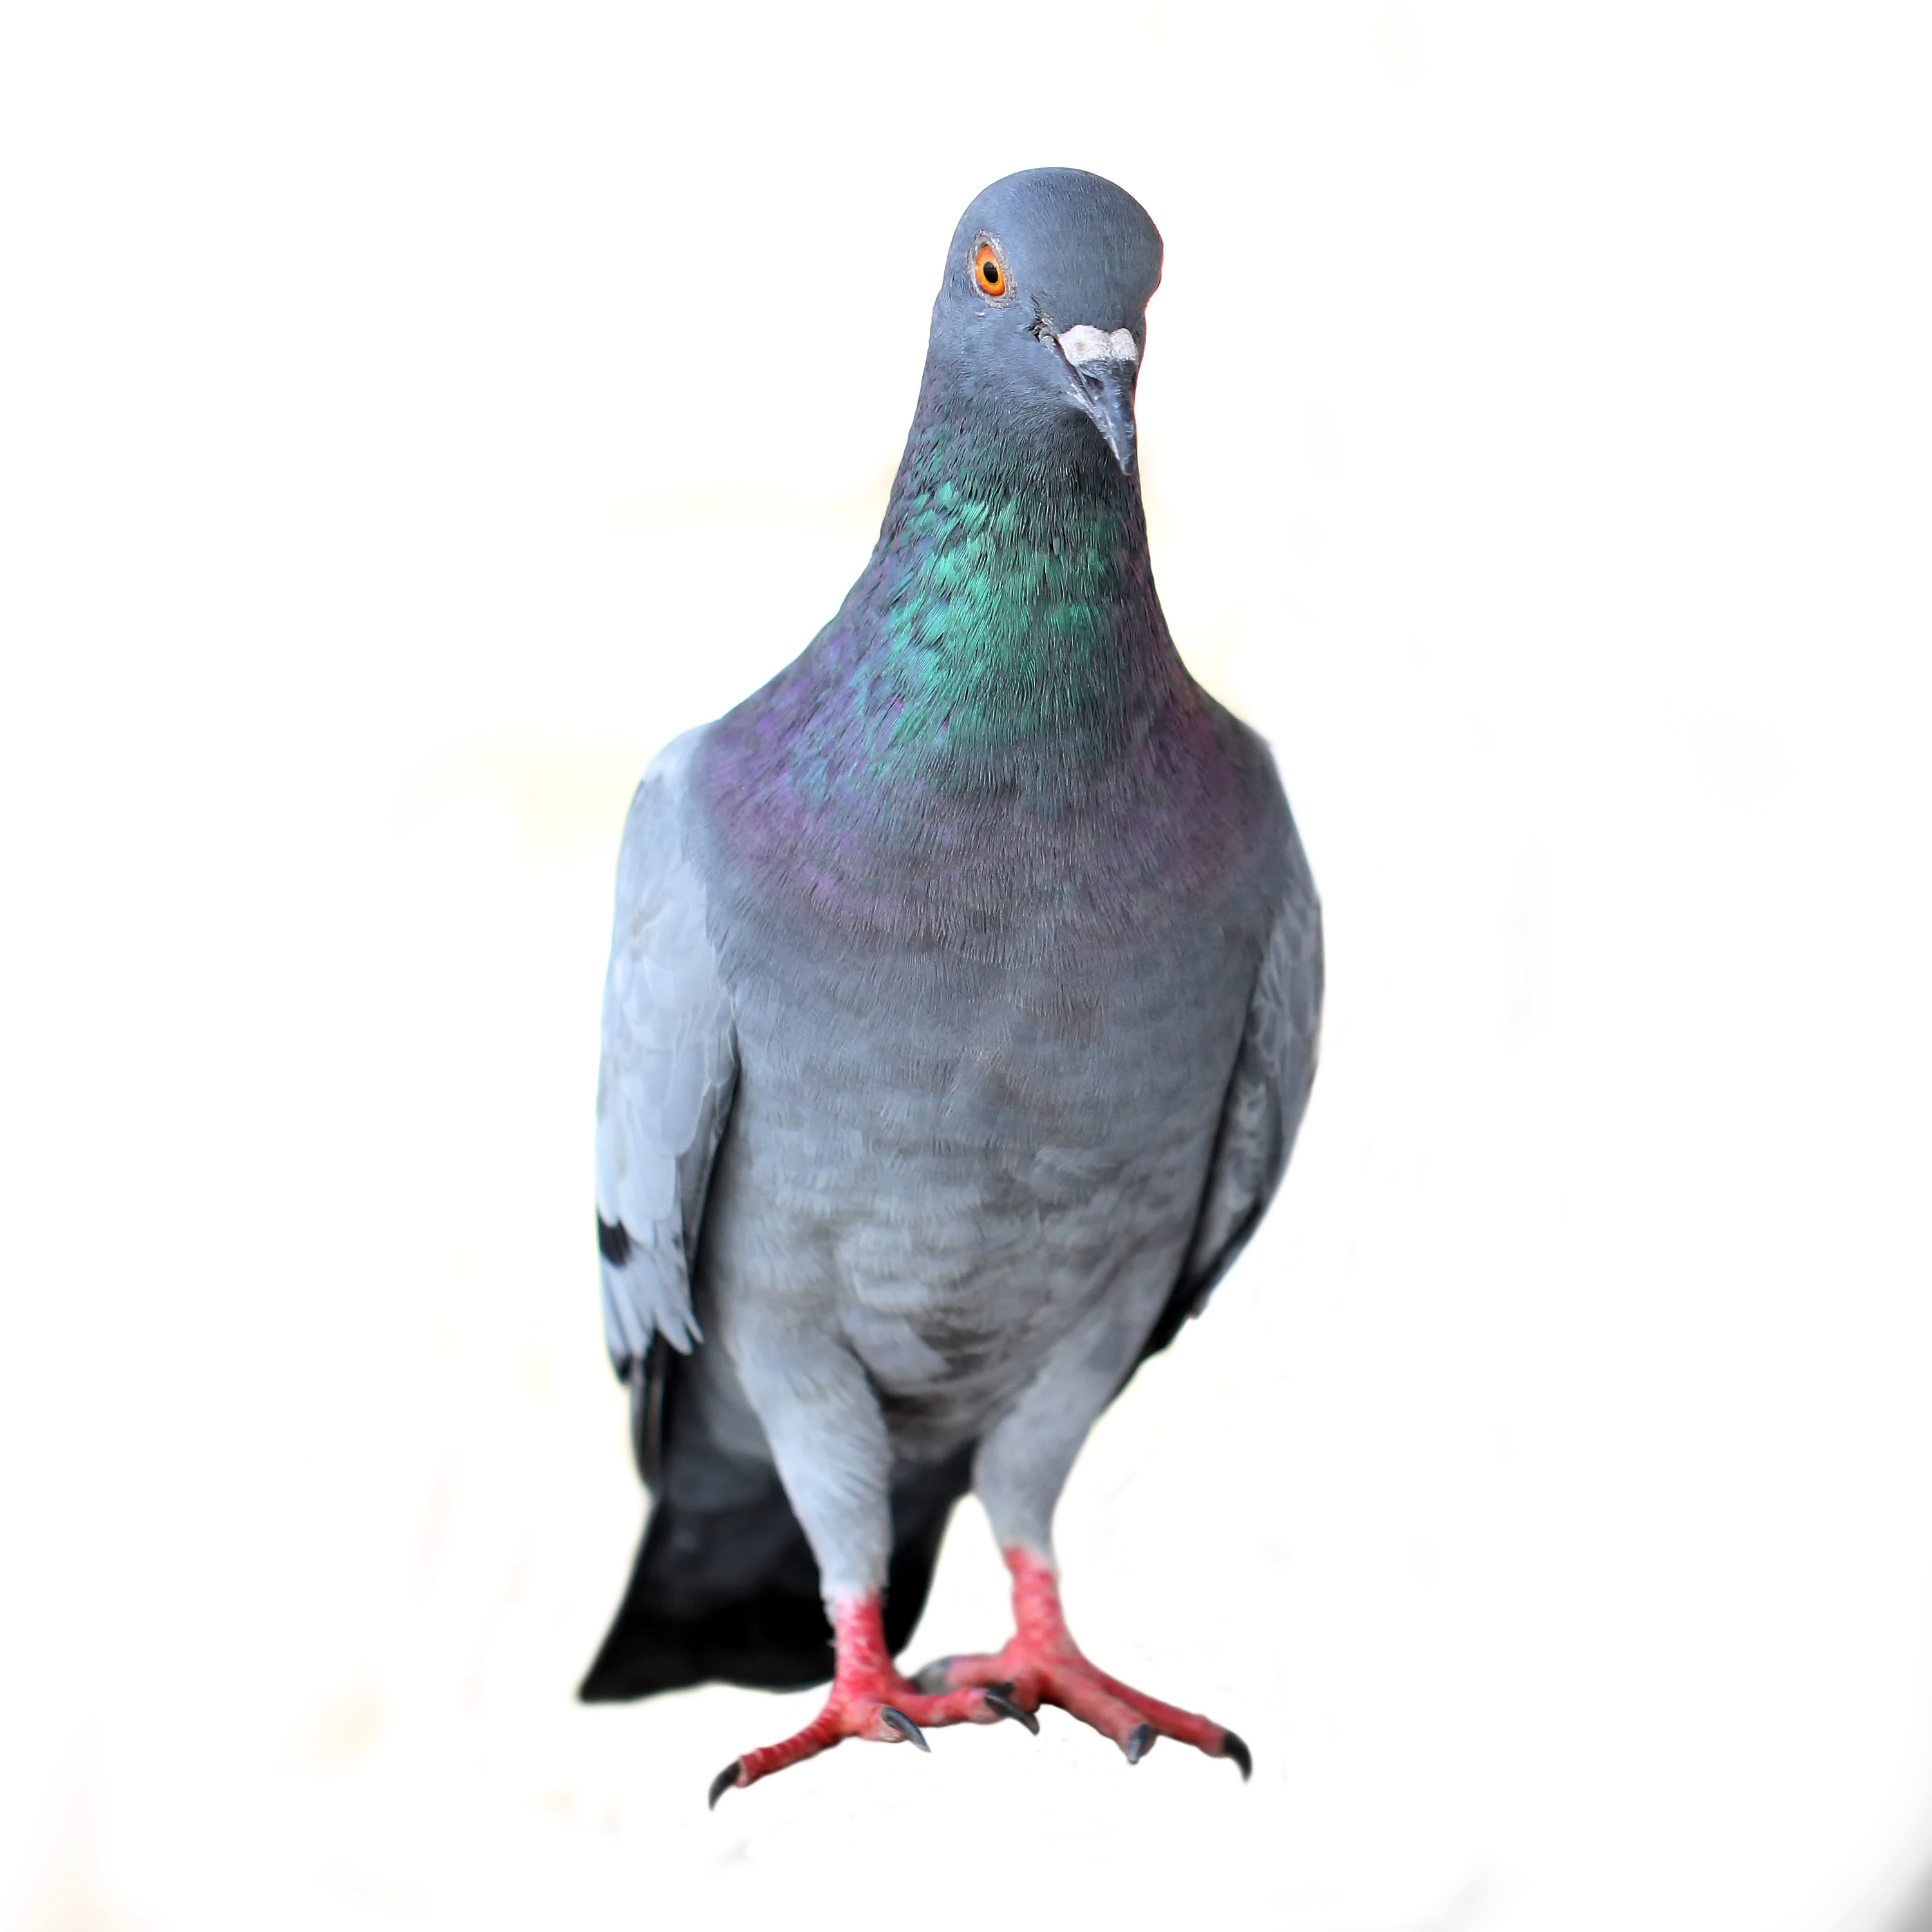 Get rid of pigeons in St Louis | Wildlife Command Center MO